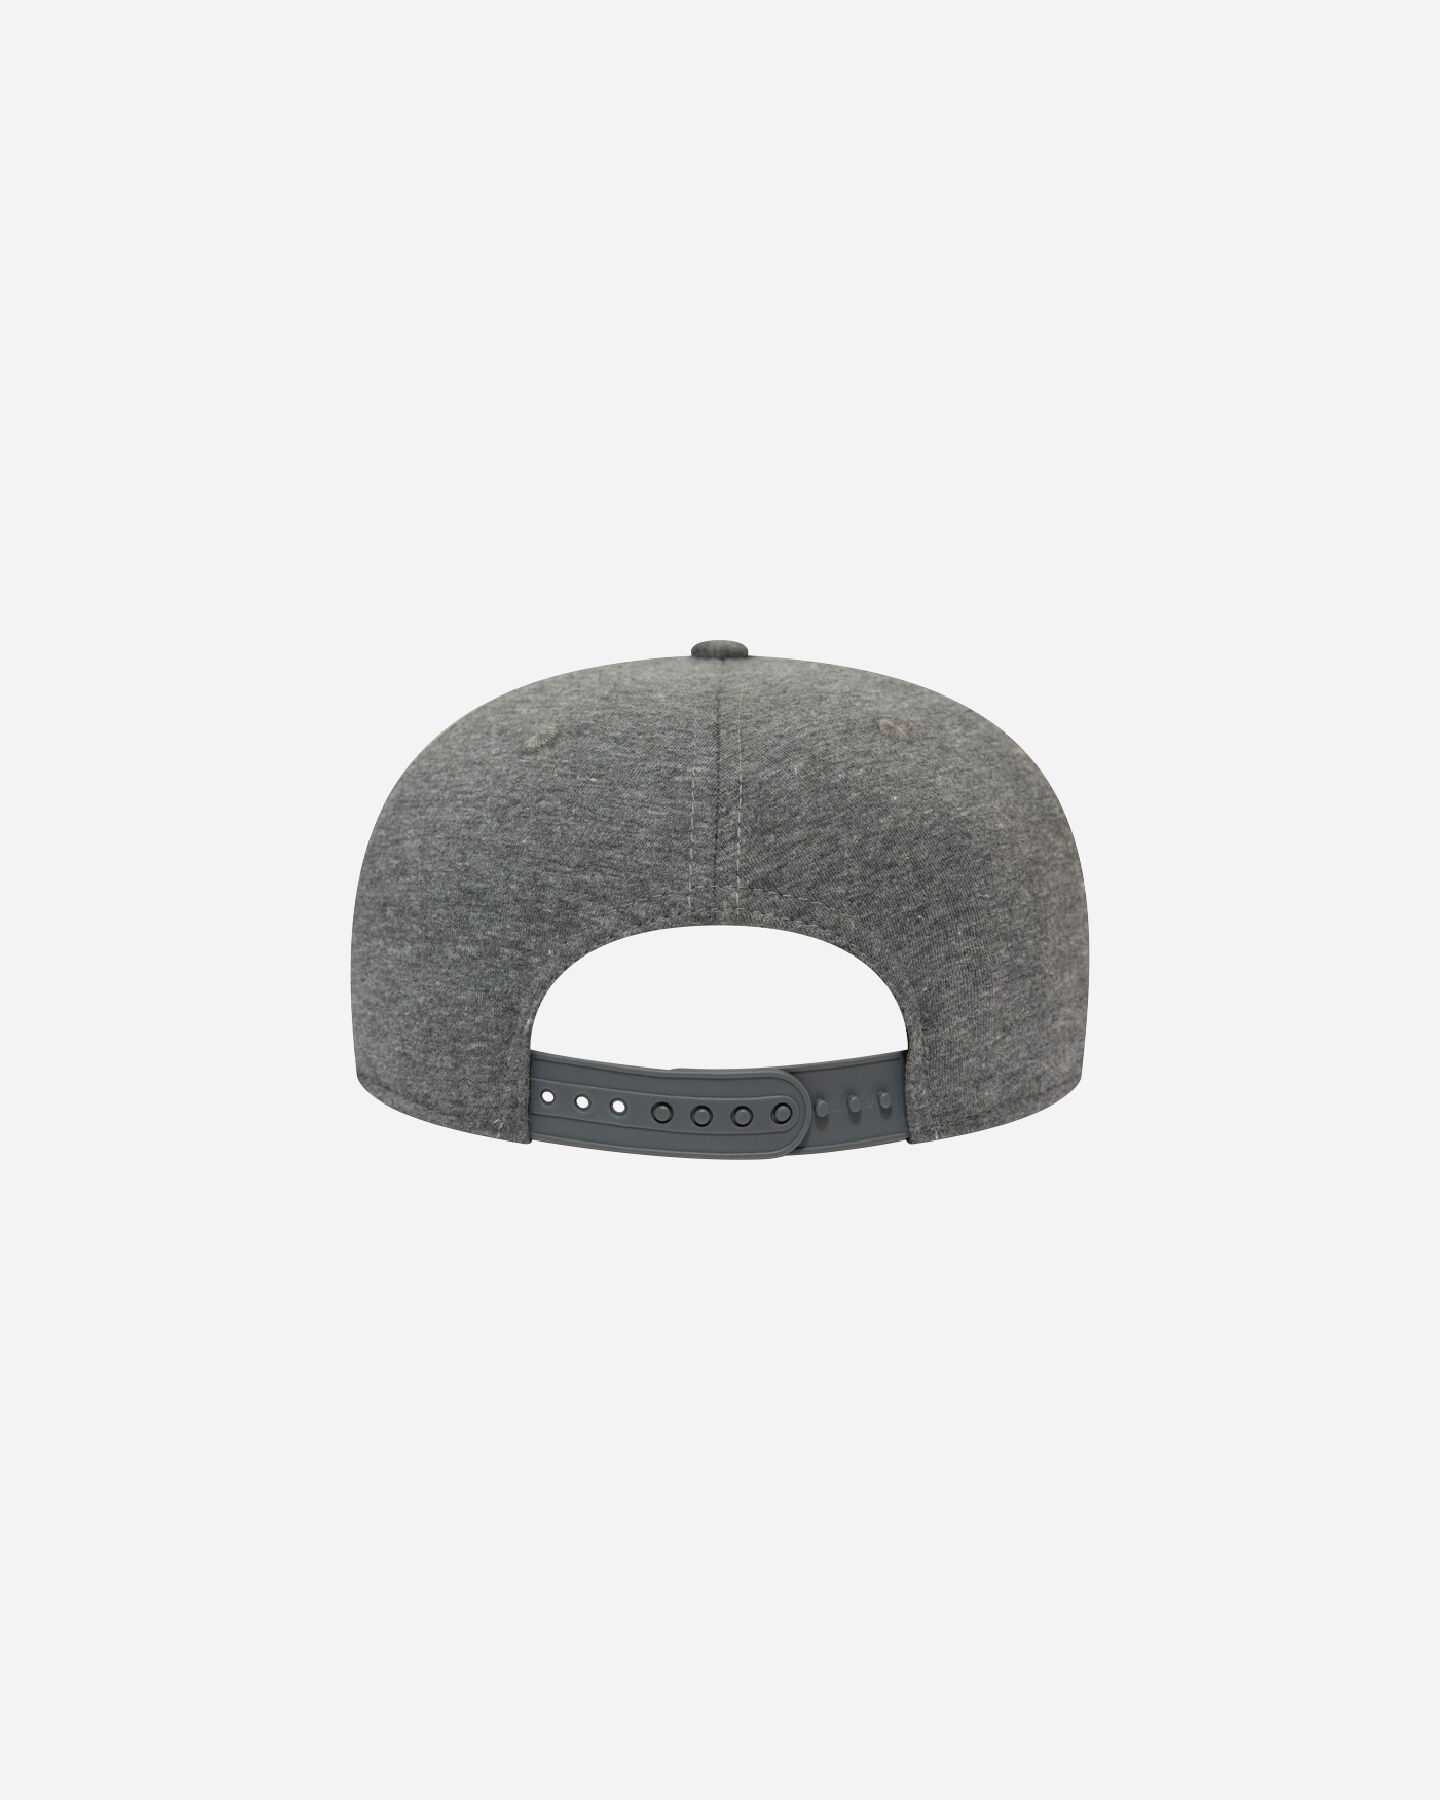  Cappellino NEW ERA 9FIFTY SRETCH SNAP JERSEY S5238866 scatto 3